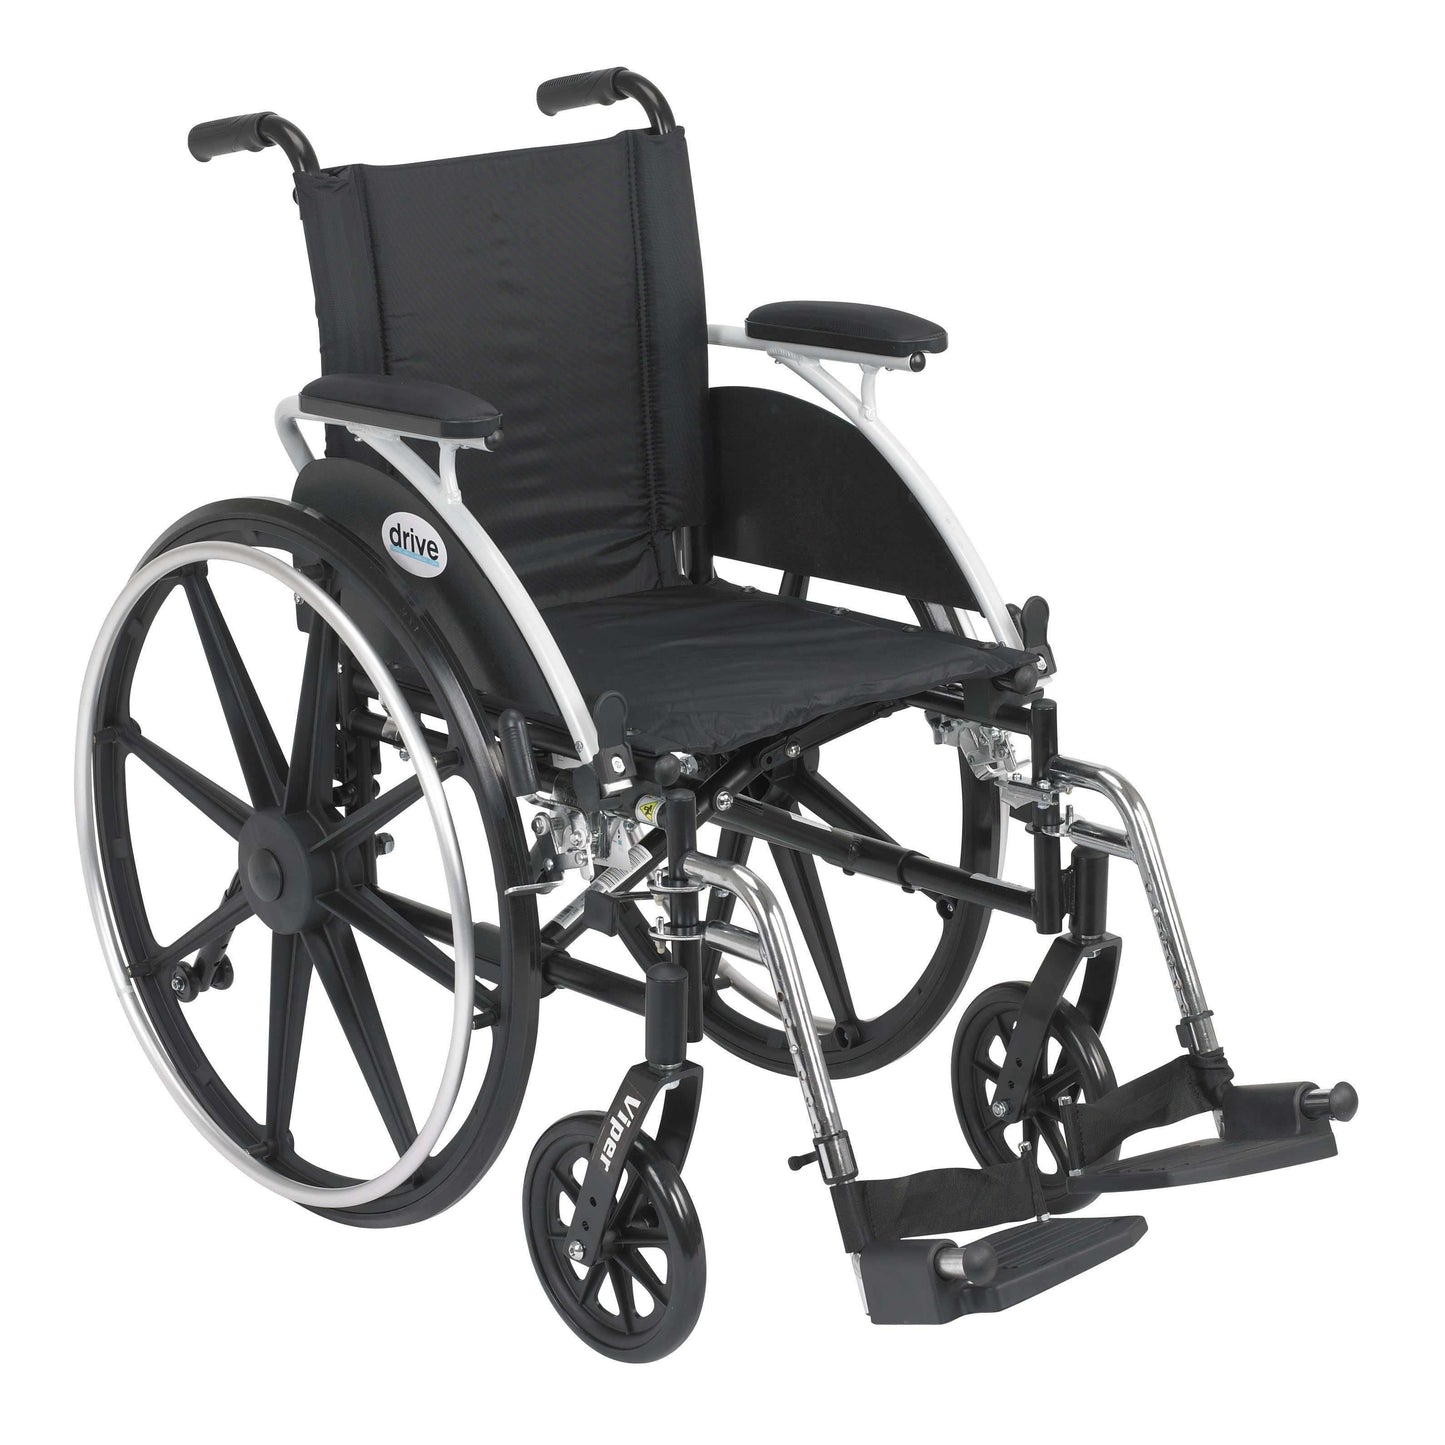 Drive l412dda-sf Viper Wheelchair with Flip Back Removable Arms, Desk Arms, Swing away Footrests, 12" Seat